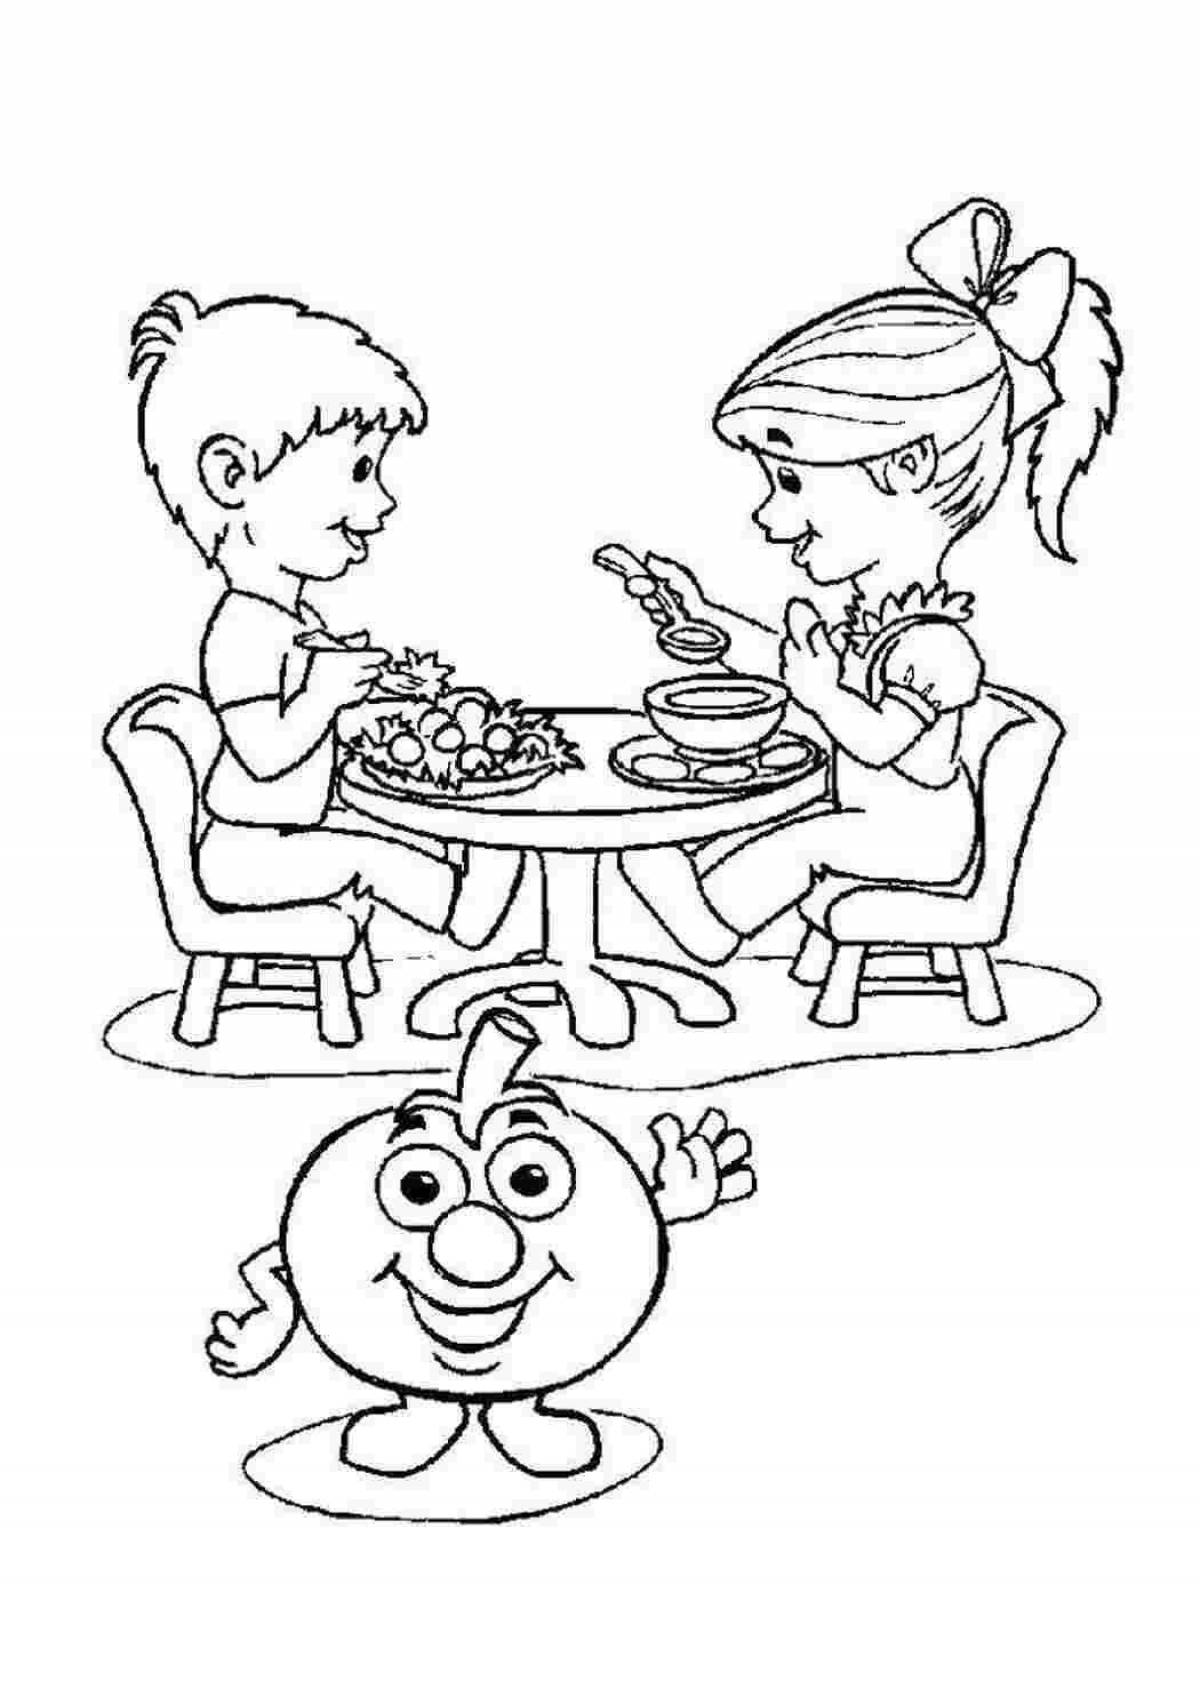 Coloring book hearty dinner